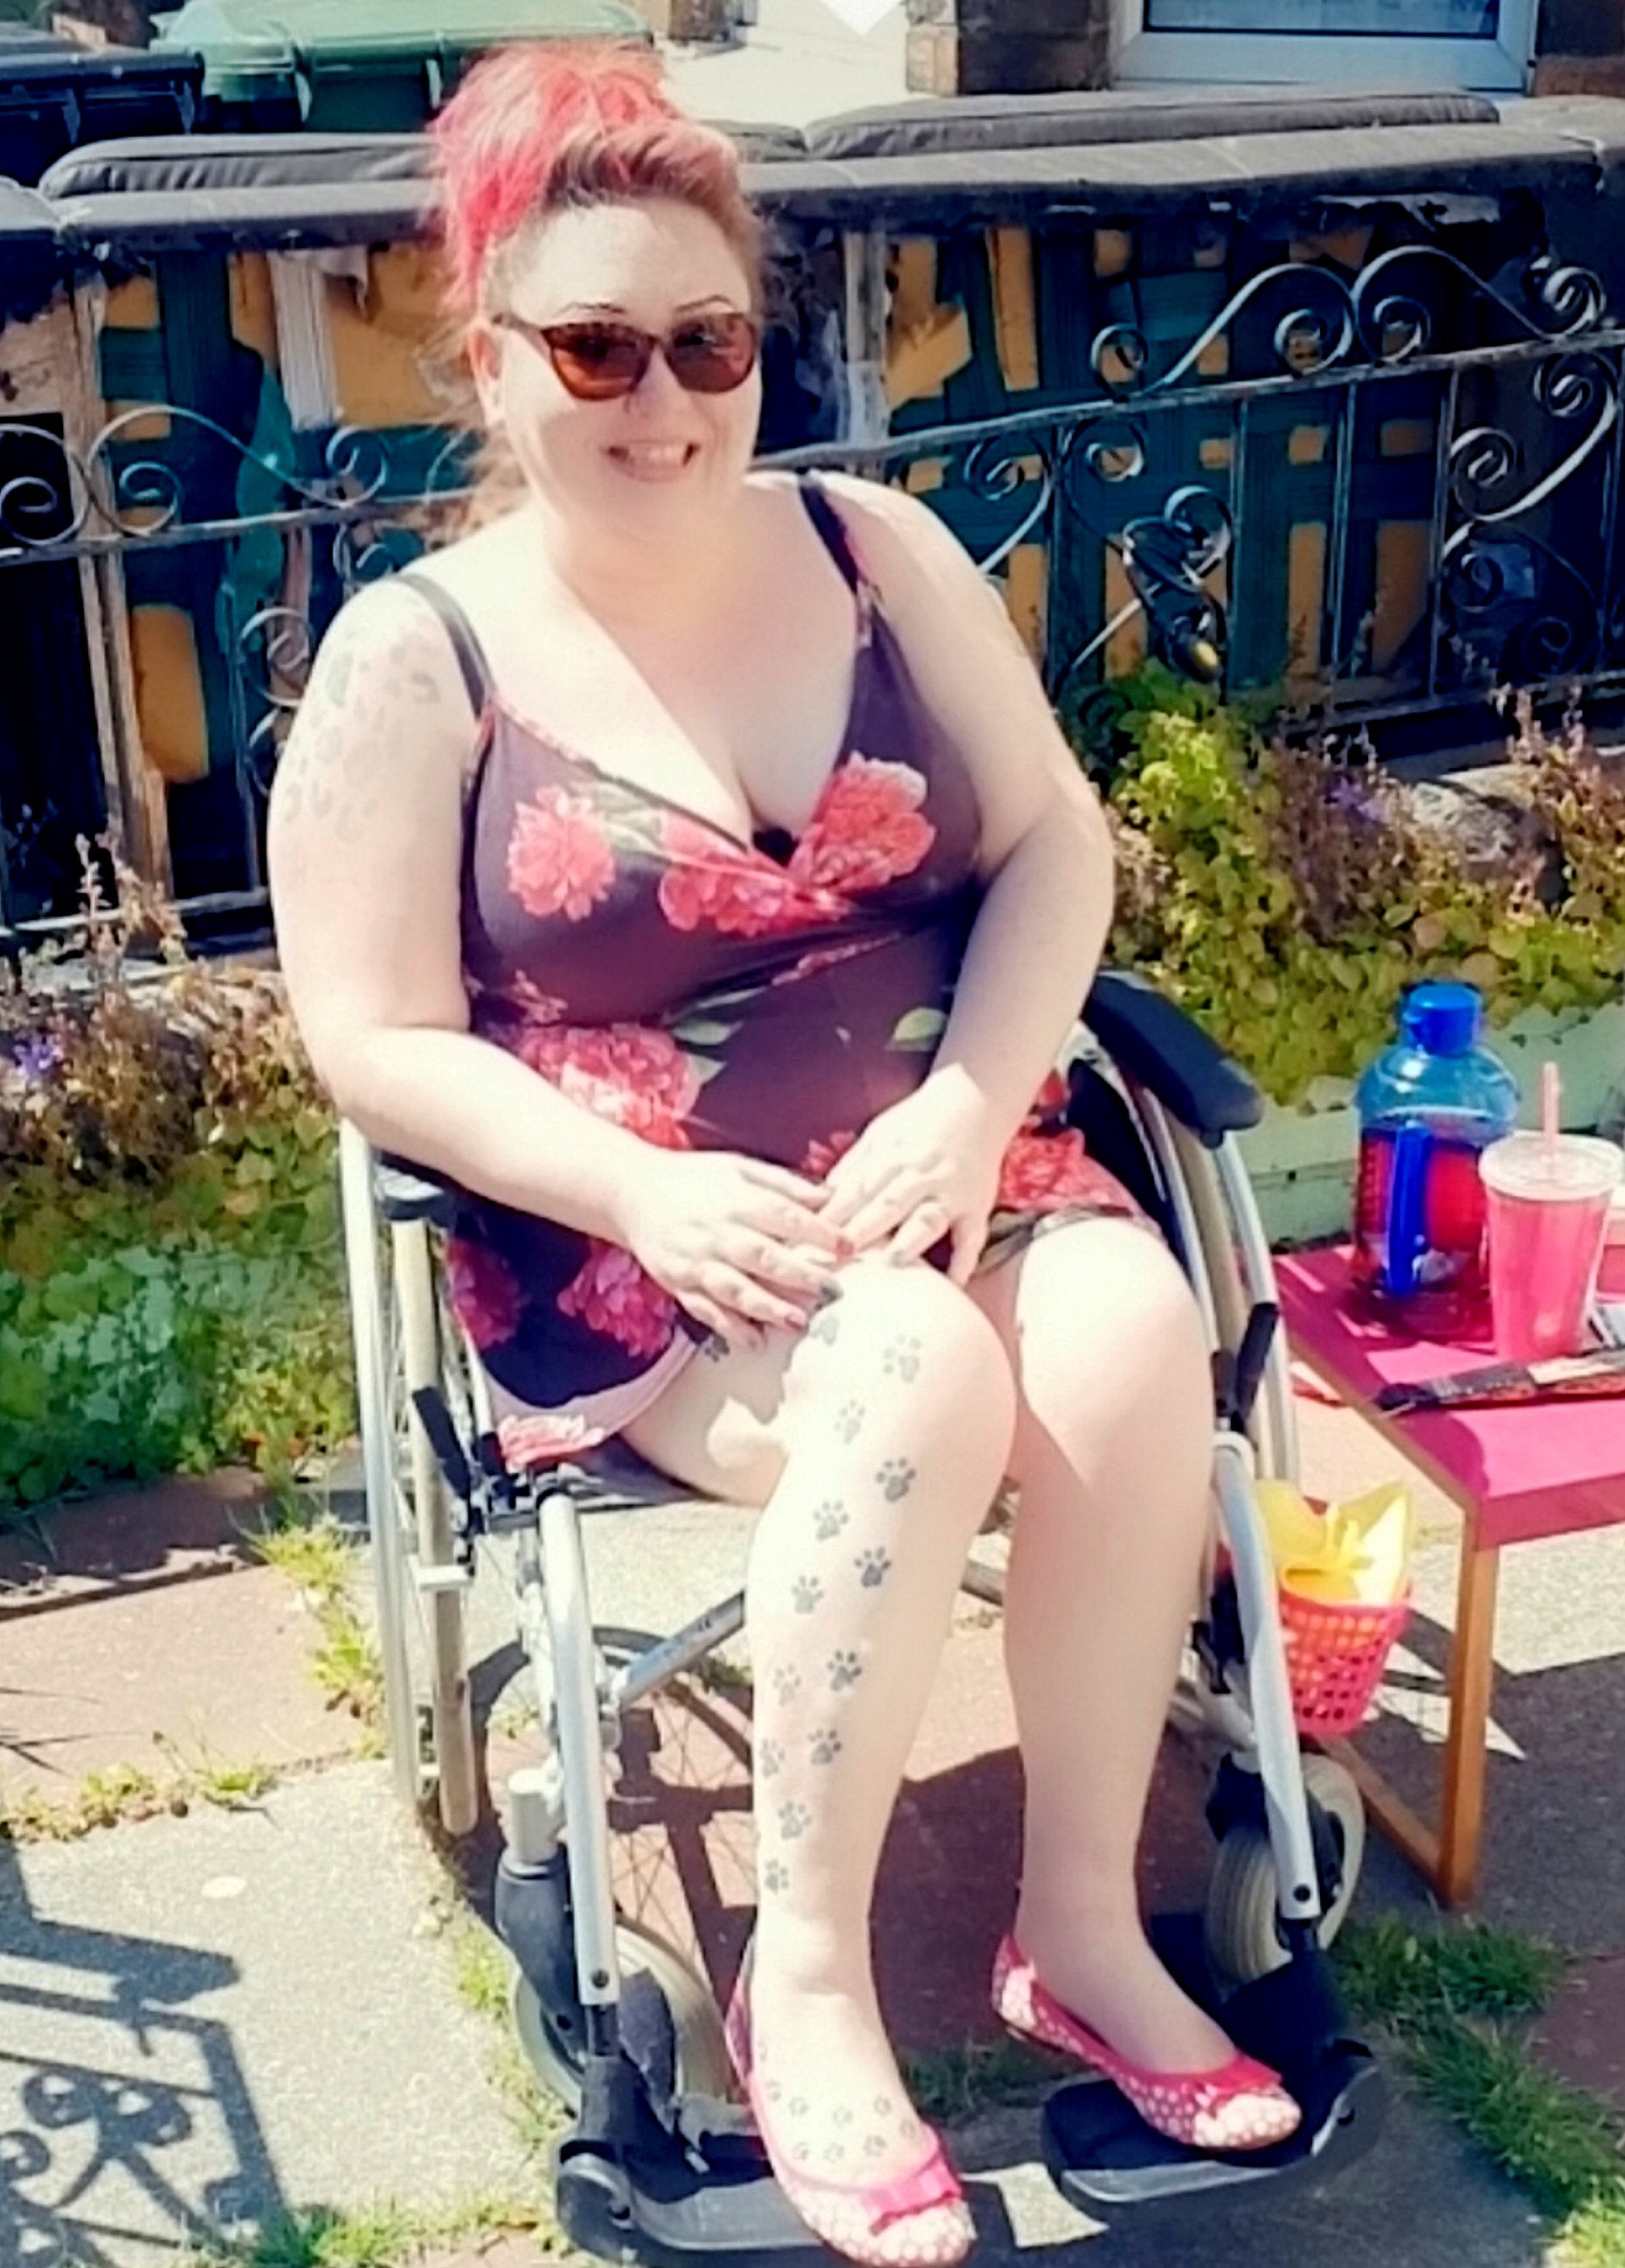 A woman who raised over £2k via a GoFundMe for a gastric sleeve operation has been left fighting for her life after botched surgery left her stomach ’like concrete’